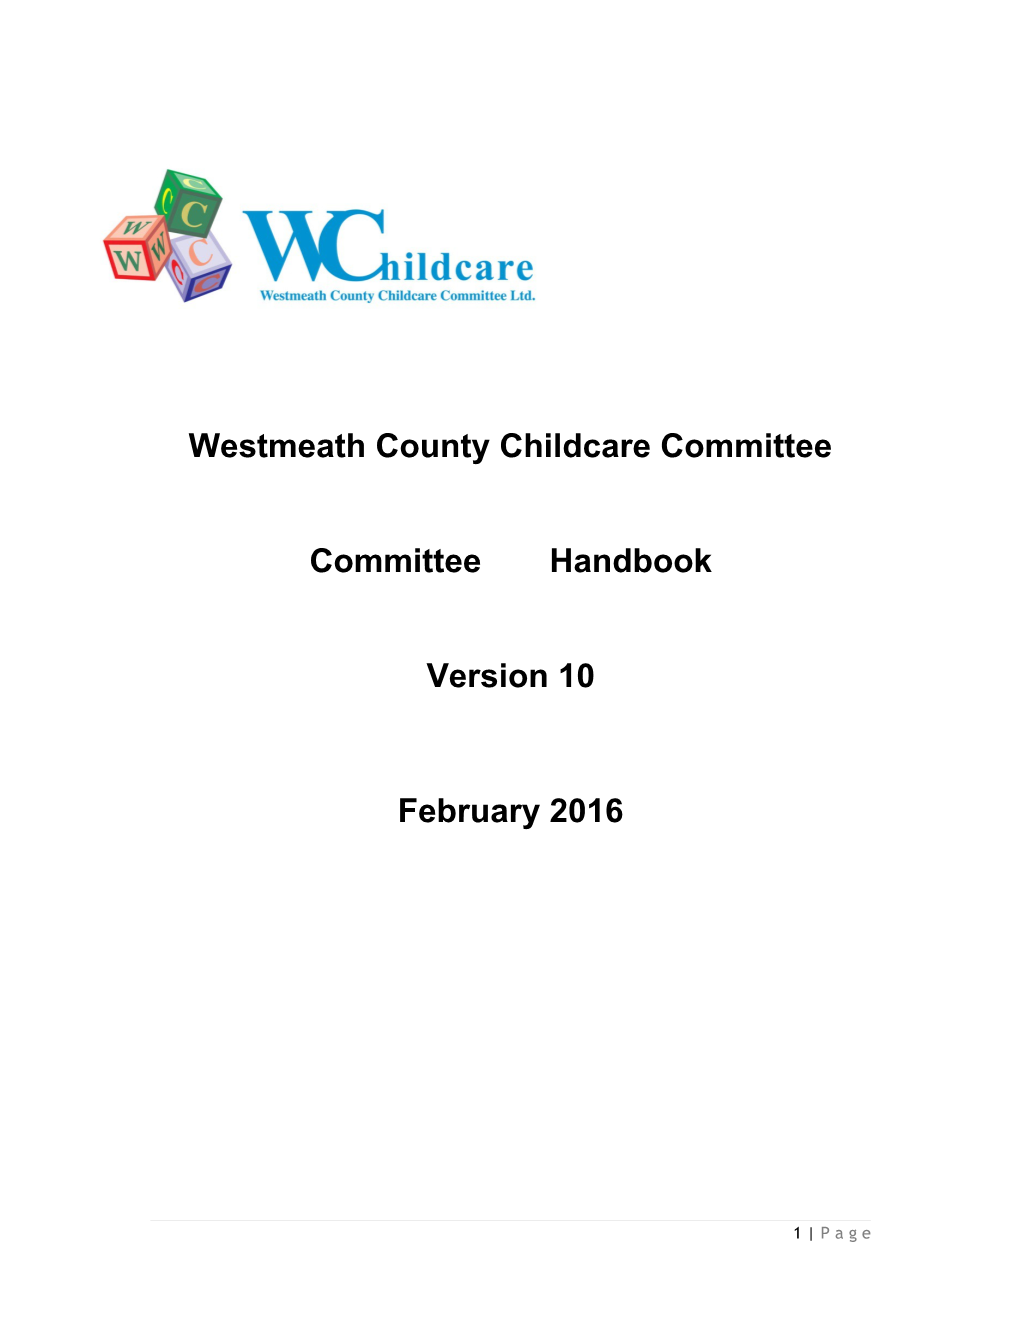 Westmeath County Childcare Committee